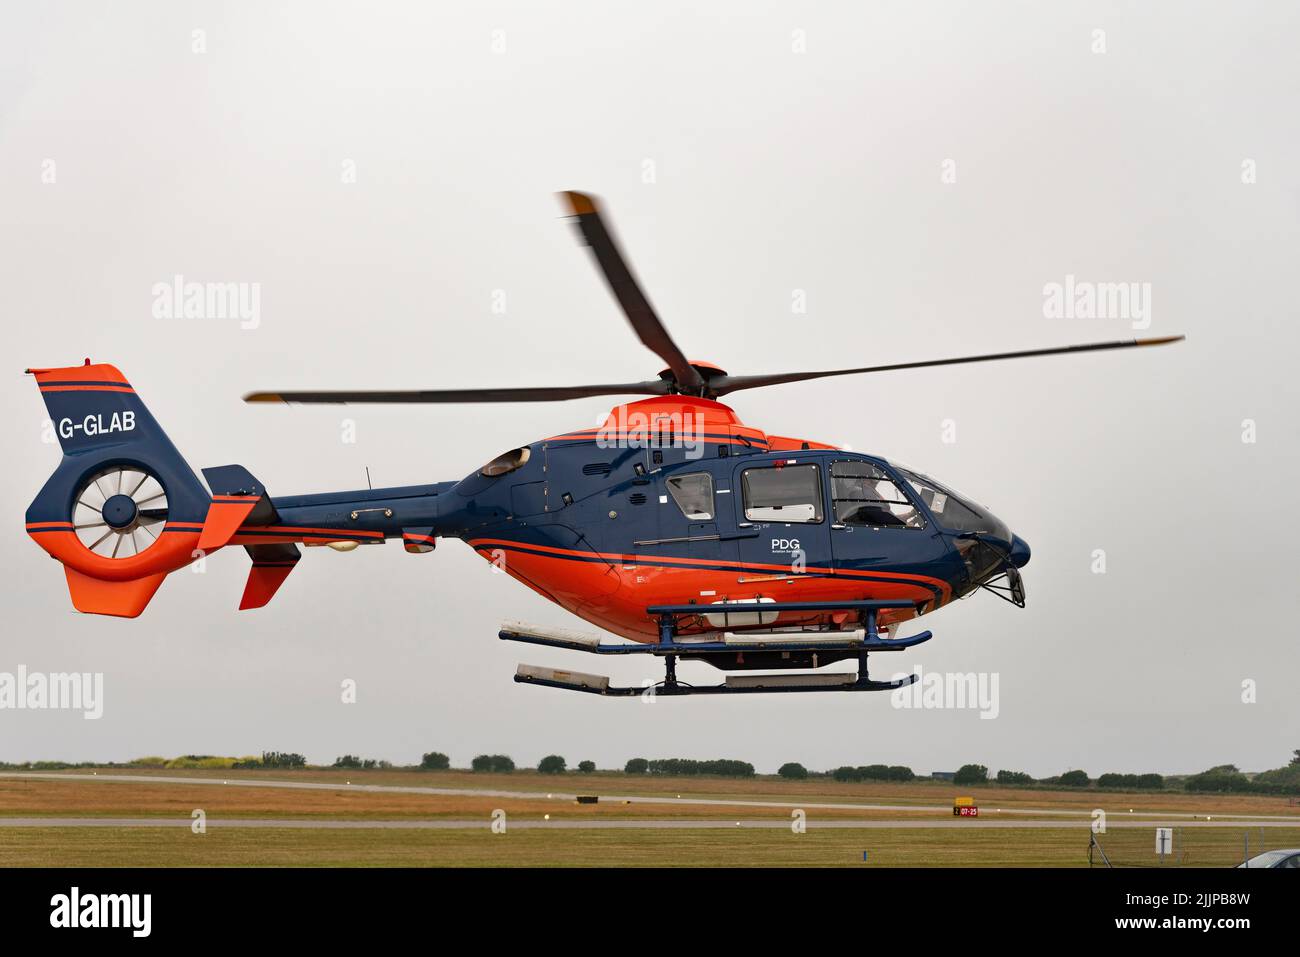 Cornwall, England, UK. 2022. A modern helicopter in flight with covered tail rotor and painted red and blue colours. Stock Photo